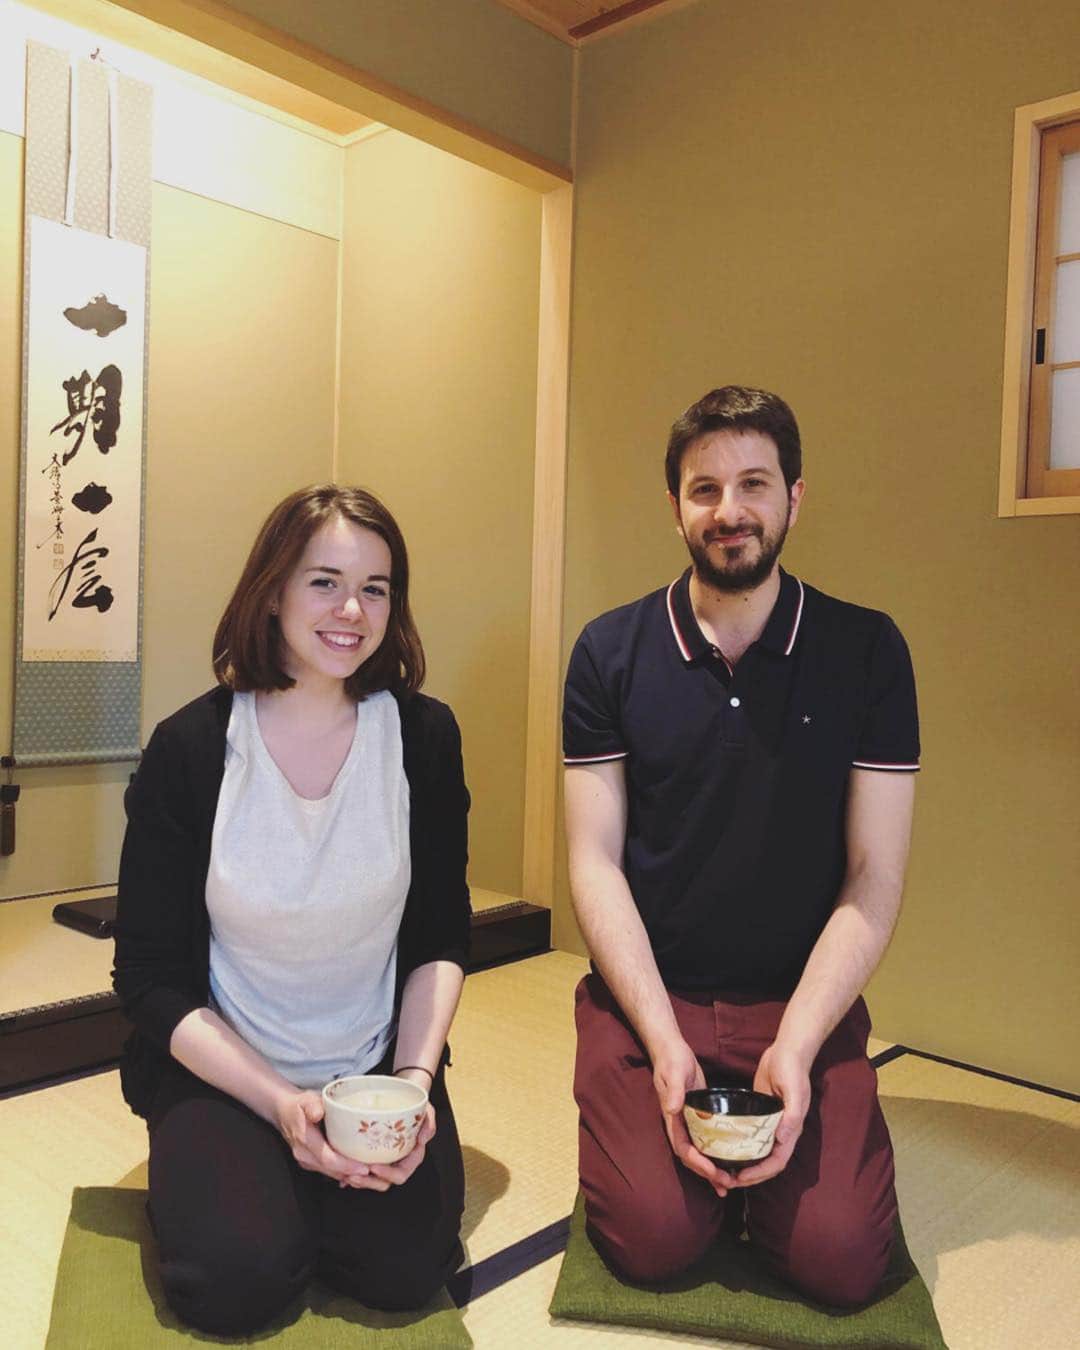 MagicalTripさんのインスタグラム写真 - (MagicalTripInstagram)「Welcome to @Magicaltripcom ⠀⠀⠀ “Travel Deeper with a Local Guide!” ⠀⠀⠀ -------------------------------------------------⠀⠀⠀ Tea Ceremony Experience in Kyoto!⠀ The Japanese Tea Ceremony is a ritual in which tea is prepared and served, and it's considered one of the classical Japanese arts.⠀ 🍵：Kyoto Tea Ceremony & Kiyomizu-dera Temple Walking Tour⠀ 📷：Magical Trip Guide Yuto⠀ -------------------------------------------------⠀⠀⠀ 【🌀What is #Magicaltrip 🌀】⠀⠀⠀ *⠀⠀⠀ Unique travel experiences with local guides in Japan! 🇯🇵🇯🇵⠀⠀⠀ Our local guides will take you to the local and hidden places in Japan!⠀⠀⠀ *⠀⠀⠀ Why don’t you make your special travel experience more unique and unforgettable with us? ⠀⠀⠀ *⠀⠀⠀⠀⠀ 【😎Tour Information😎】⠀⠀⠀ Please check out our unique tours in Japan👇👇⠀⠀⠀ *⠀⠀⠀ *⠀⠀⠀ Bar Hopping tours🍶in Tokyo, Osaka, Kyoto, and Hiroshima, discovering the local izakaya in Japan! 🍻🍻⠀⠀⠀ *⠀⠀⠀ Food tours are not all about sushi🍣but also Japanese traditional food such as okonomiyaki, oden, sashimi, yakitori 😋😋⠀⠀⠀ *⠀⠀⠀ Cultural-Walking tours🍀in Asakusa, Nakano, Akihabara, Tsukiji, Togoshiginza, Yanaka, Ryogoku, where you can dive into the deep Japanese cultures! 🚶🚶⠀⠀⠀ *⠀⠀⠀ Explore Tokyolife with cycling tour🚴🚵, club-patrol💃, Karaoke night🎤 and sumo tour! 👀👀⠀⠀⠀ *⠀⠀⠀ *⠀⠀⠀ *⠀⠀⠀ ⭐️Book our tours on the link of @Magicaltripcom profile page! ⠀⠀⠀ *⠀⠀⠀ #japan #japantrip #japantravel #japantour #kyototrip #kyototravel #greentea #japanesetea #visitkyoto #lovekyoto #japaneselocal #kyotofoodie #japanfood #ilovejapan #teaceremony #discoverjapan #visitjapan #japanesevegan #sakekanpai #kimono #kimonostyle #magicaltripcom #kiyomizutemple #kiyomizu #japaneseactivity #kyototour #japantour #kyotoexperience #lovekyoto」4月24日 20時35分 - magicaltripcom